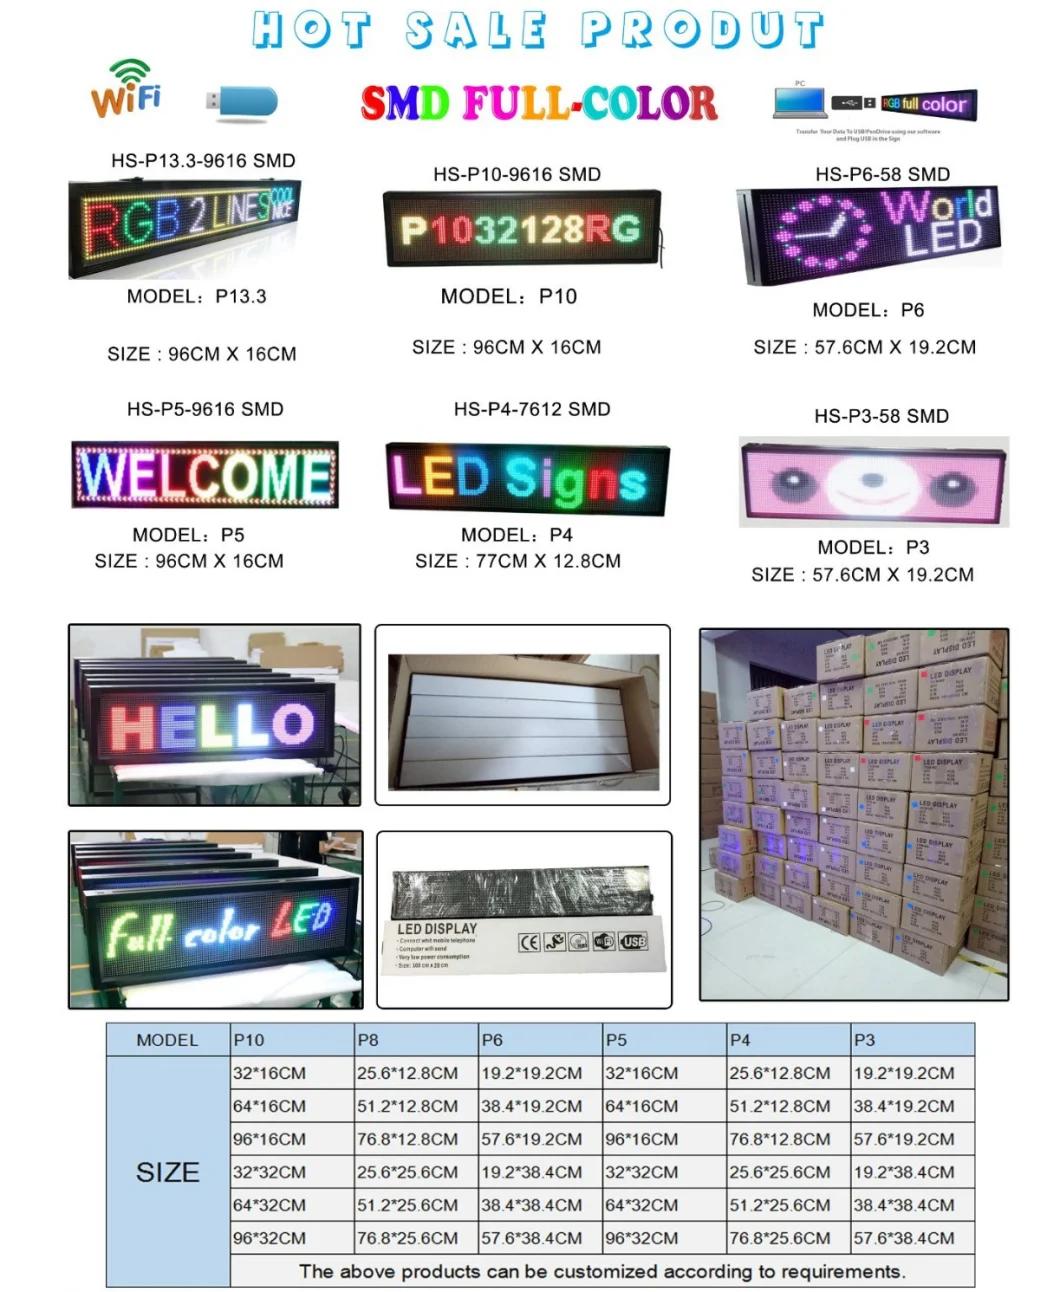 New Advertising P2.5 LED Display Screen Roadside Drainage Electronic Advertising Products